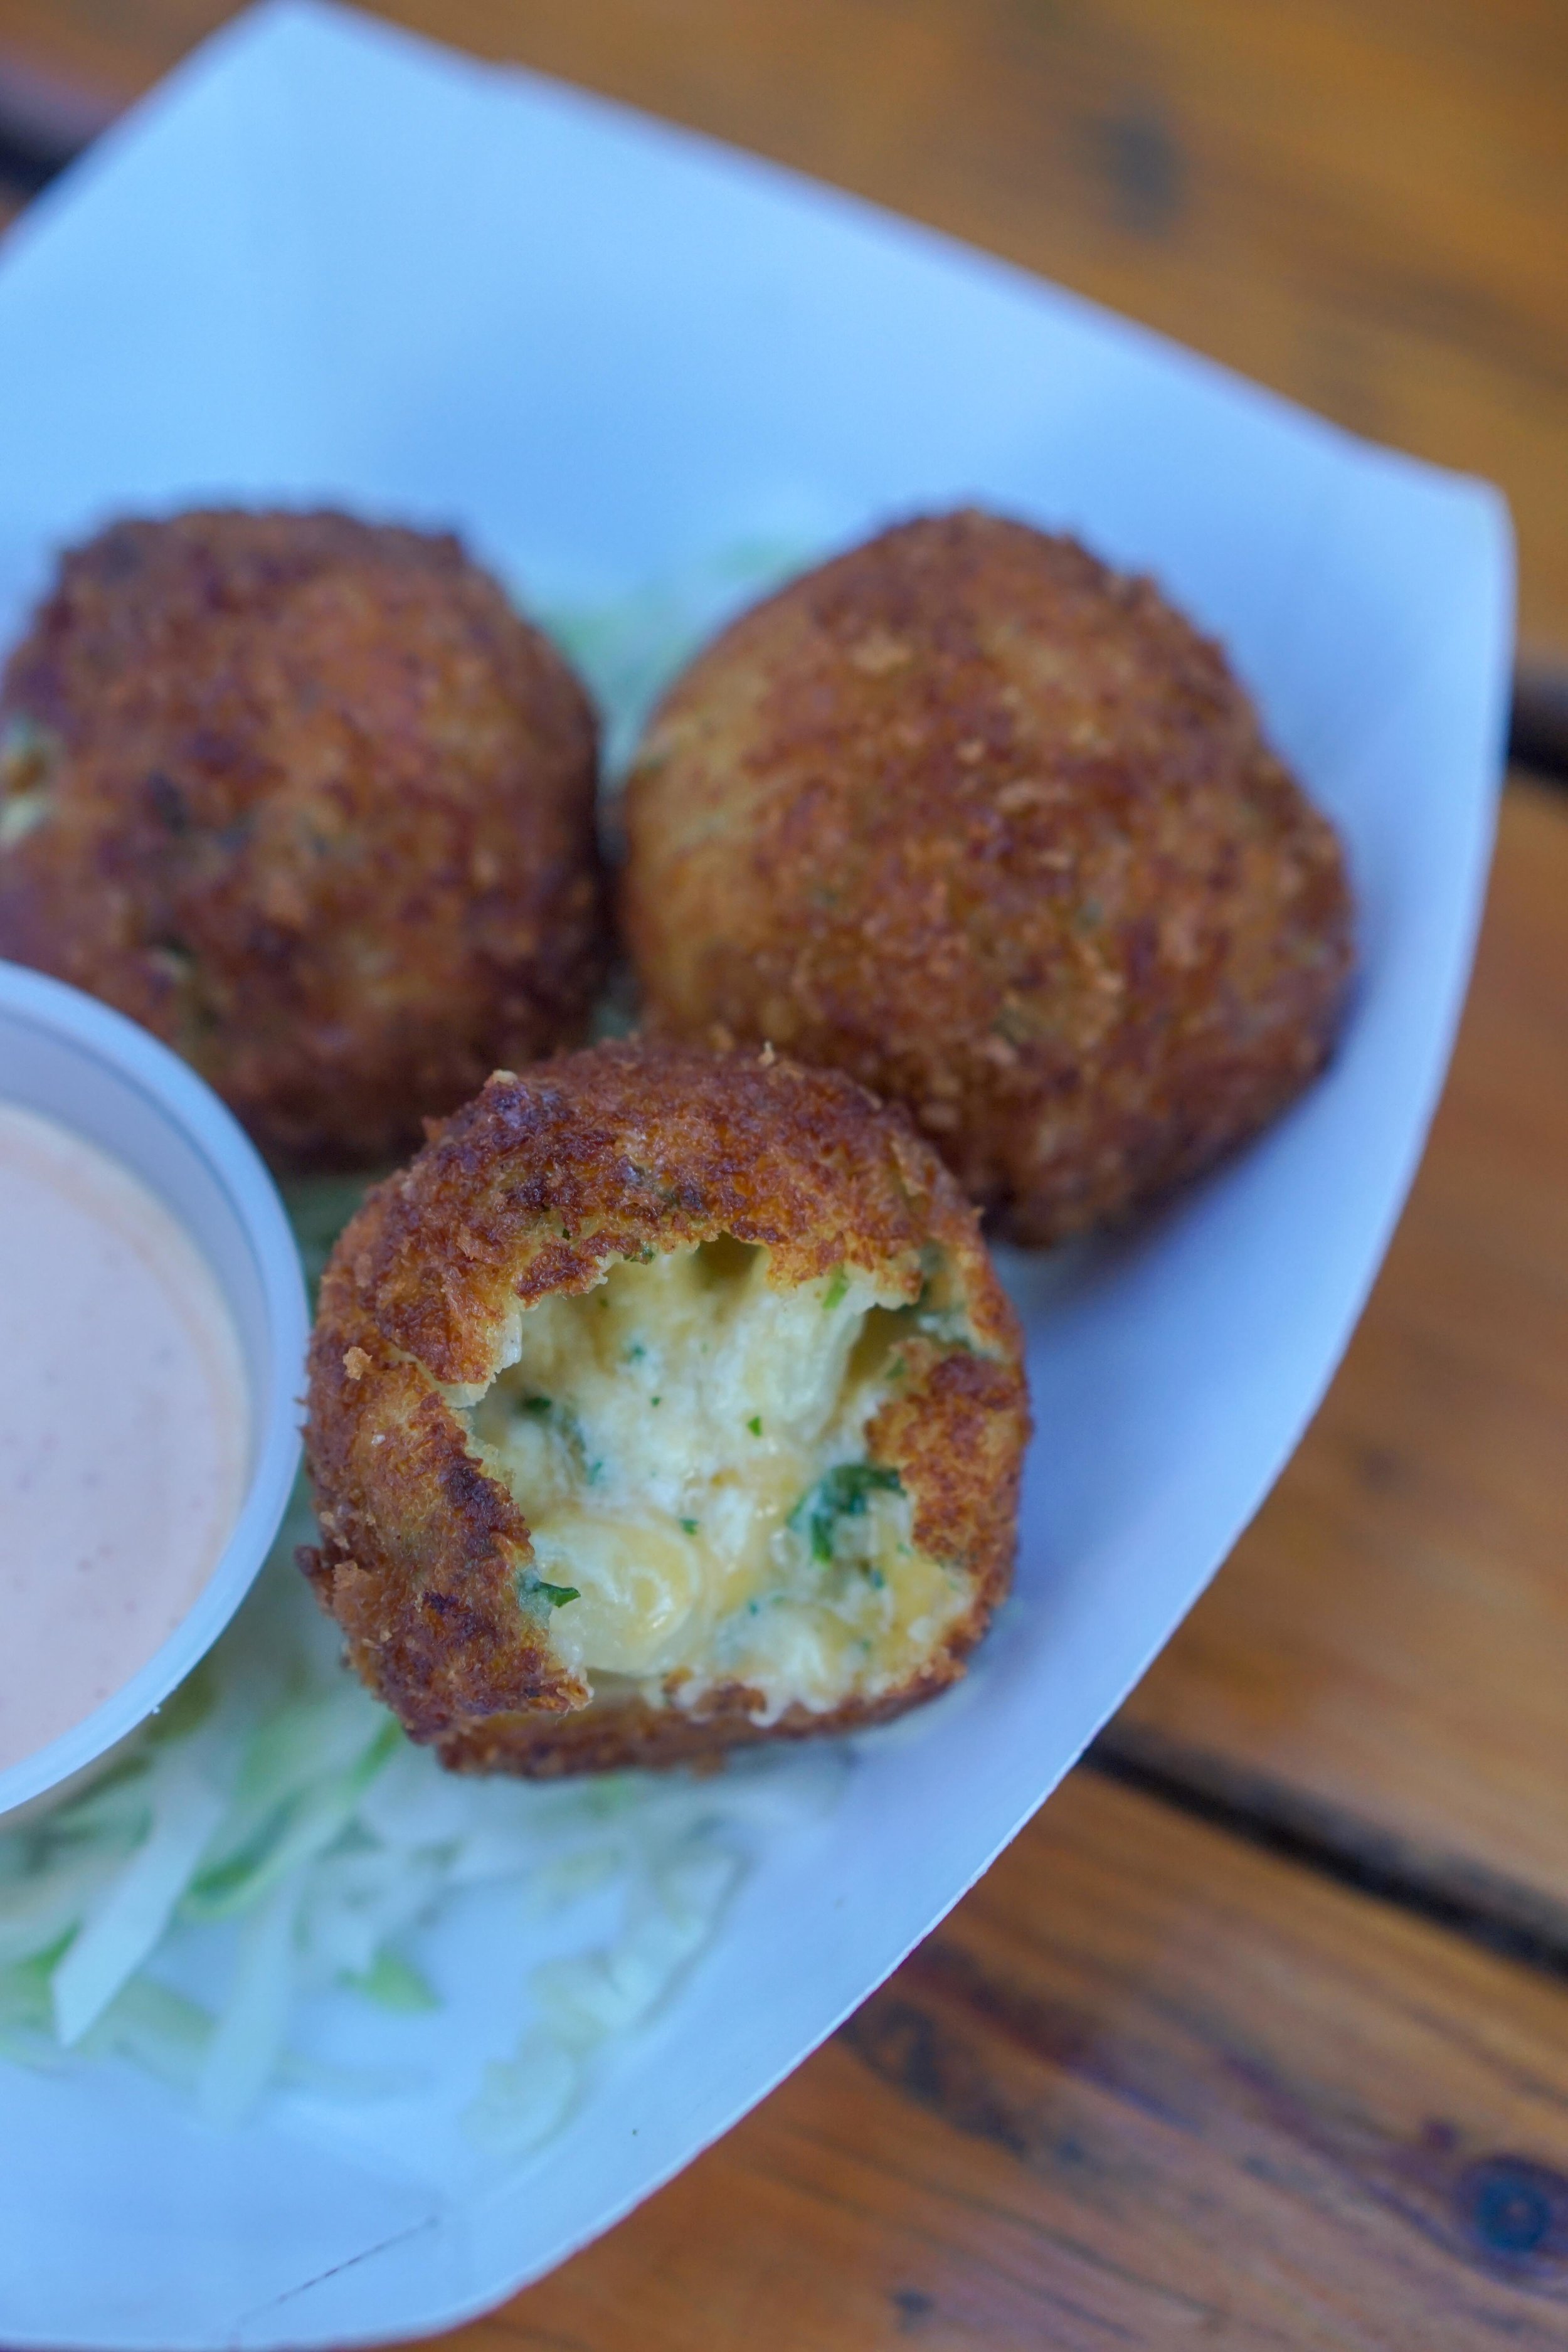  Fried Mac and Cheese Balls Scented with Truffle Oil 